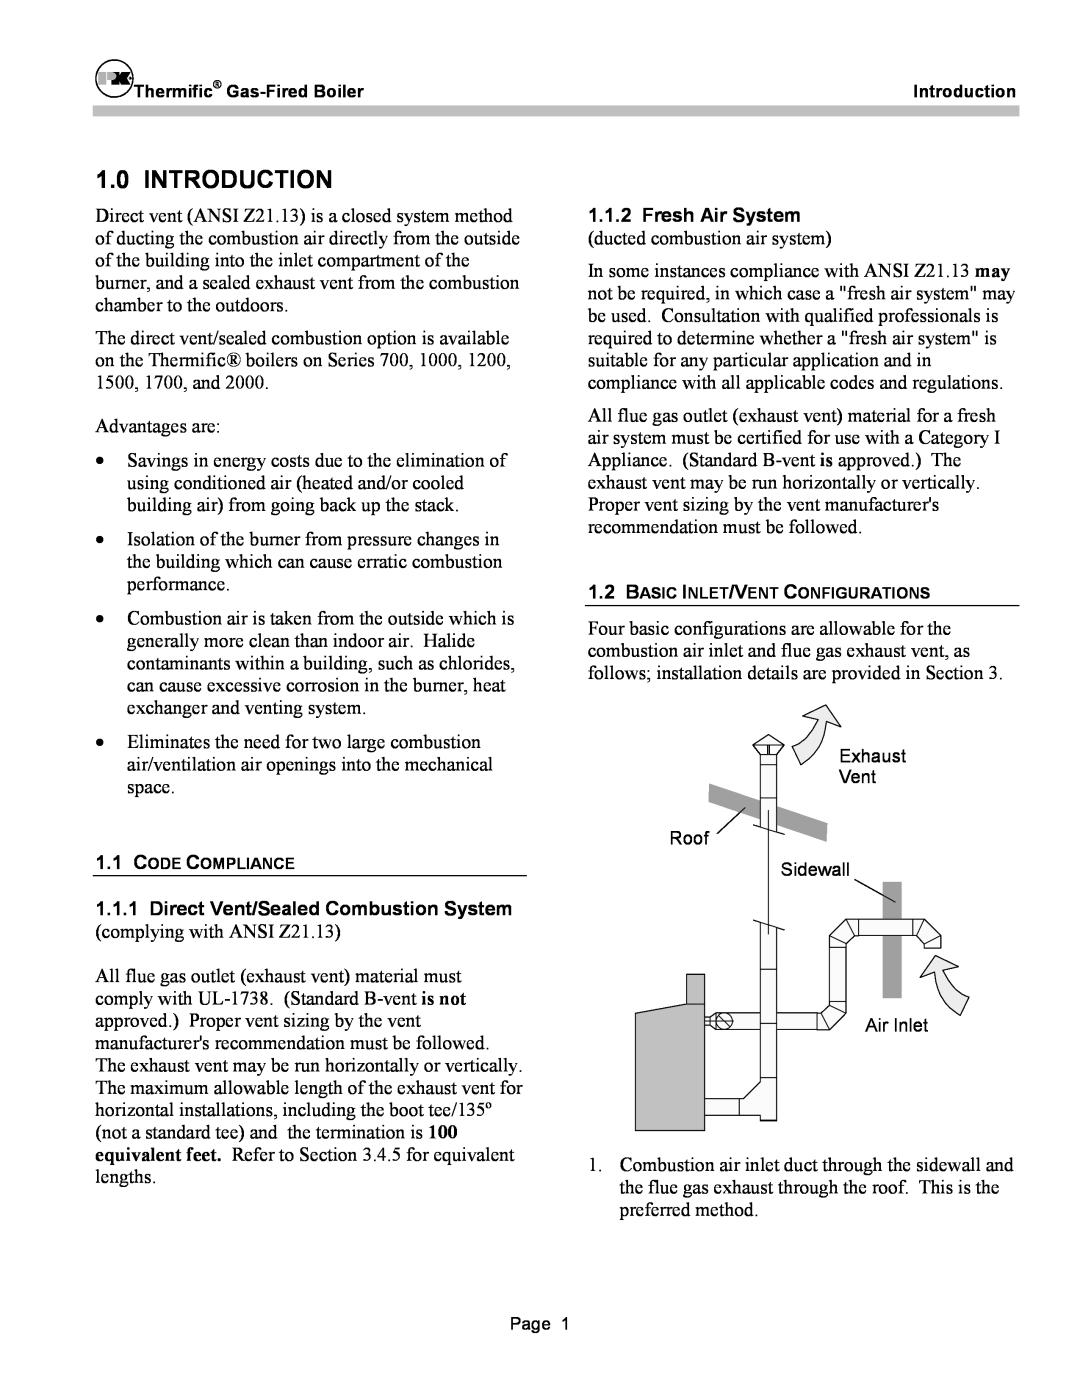 Patterson-Kelley DVSCM-02 owner manual Introduction, 1.1.1Direct Vent/Sealed Combustion System, 1.1.2Fresh Air System 